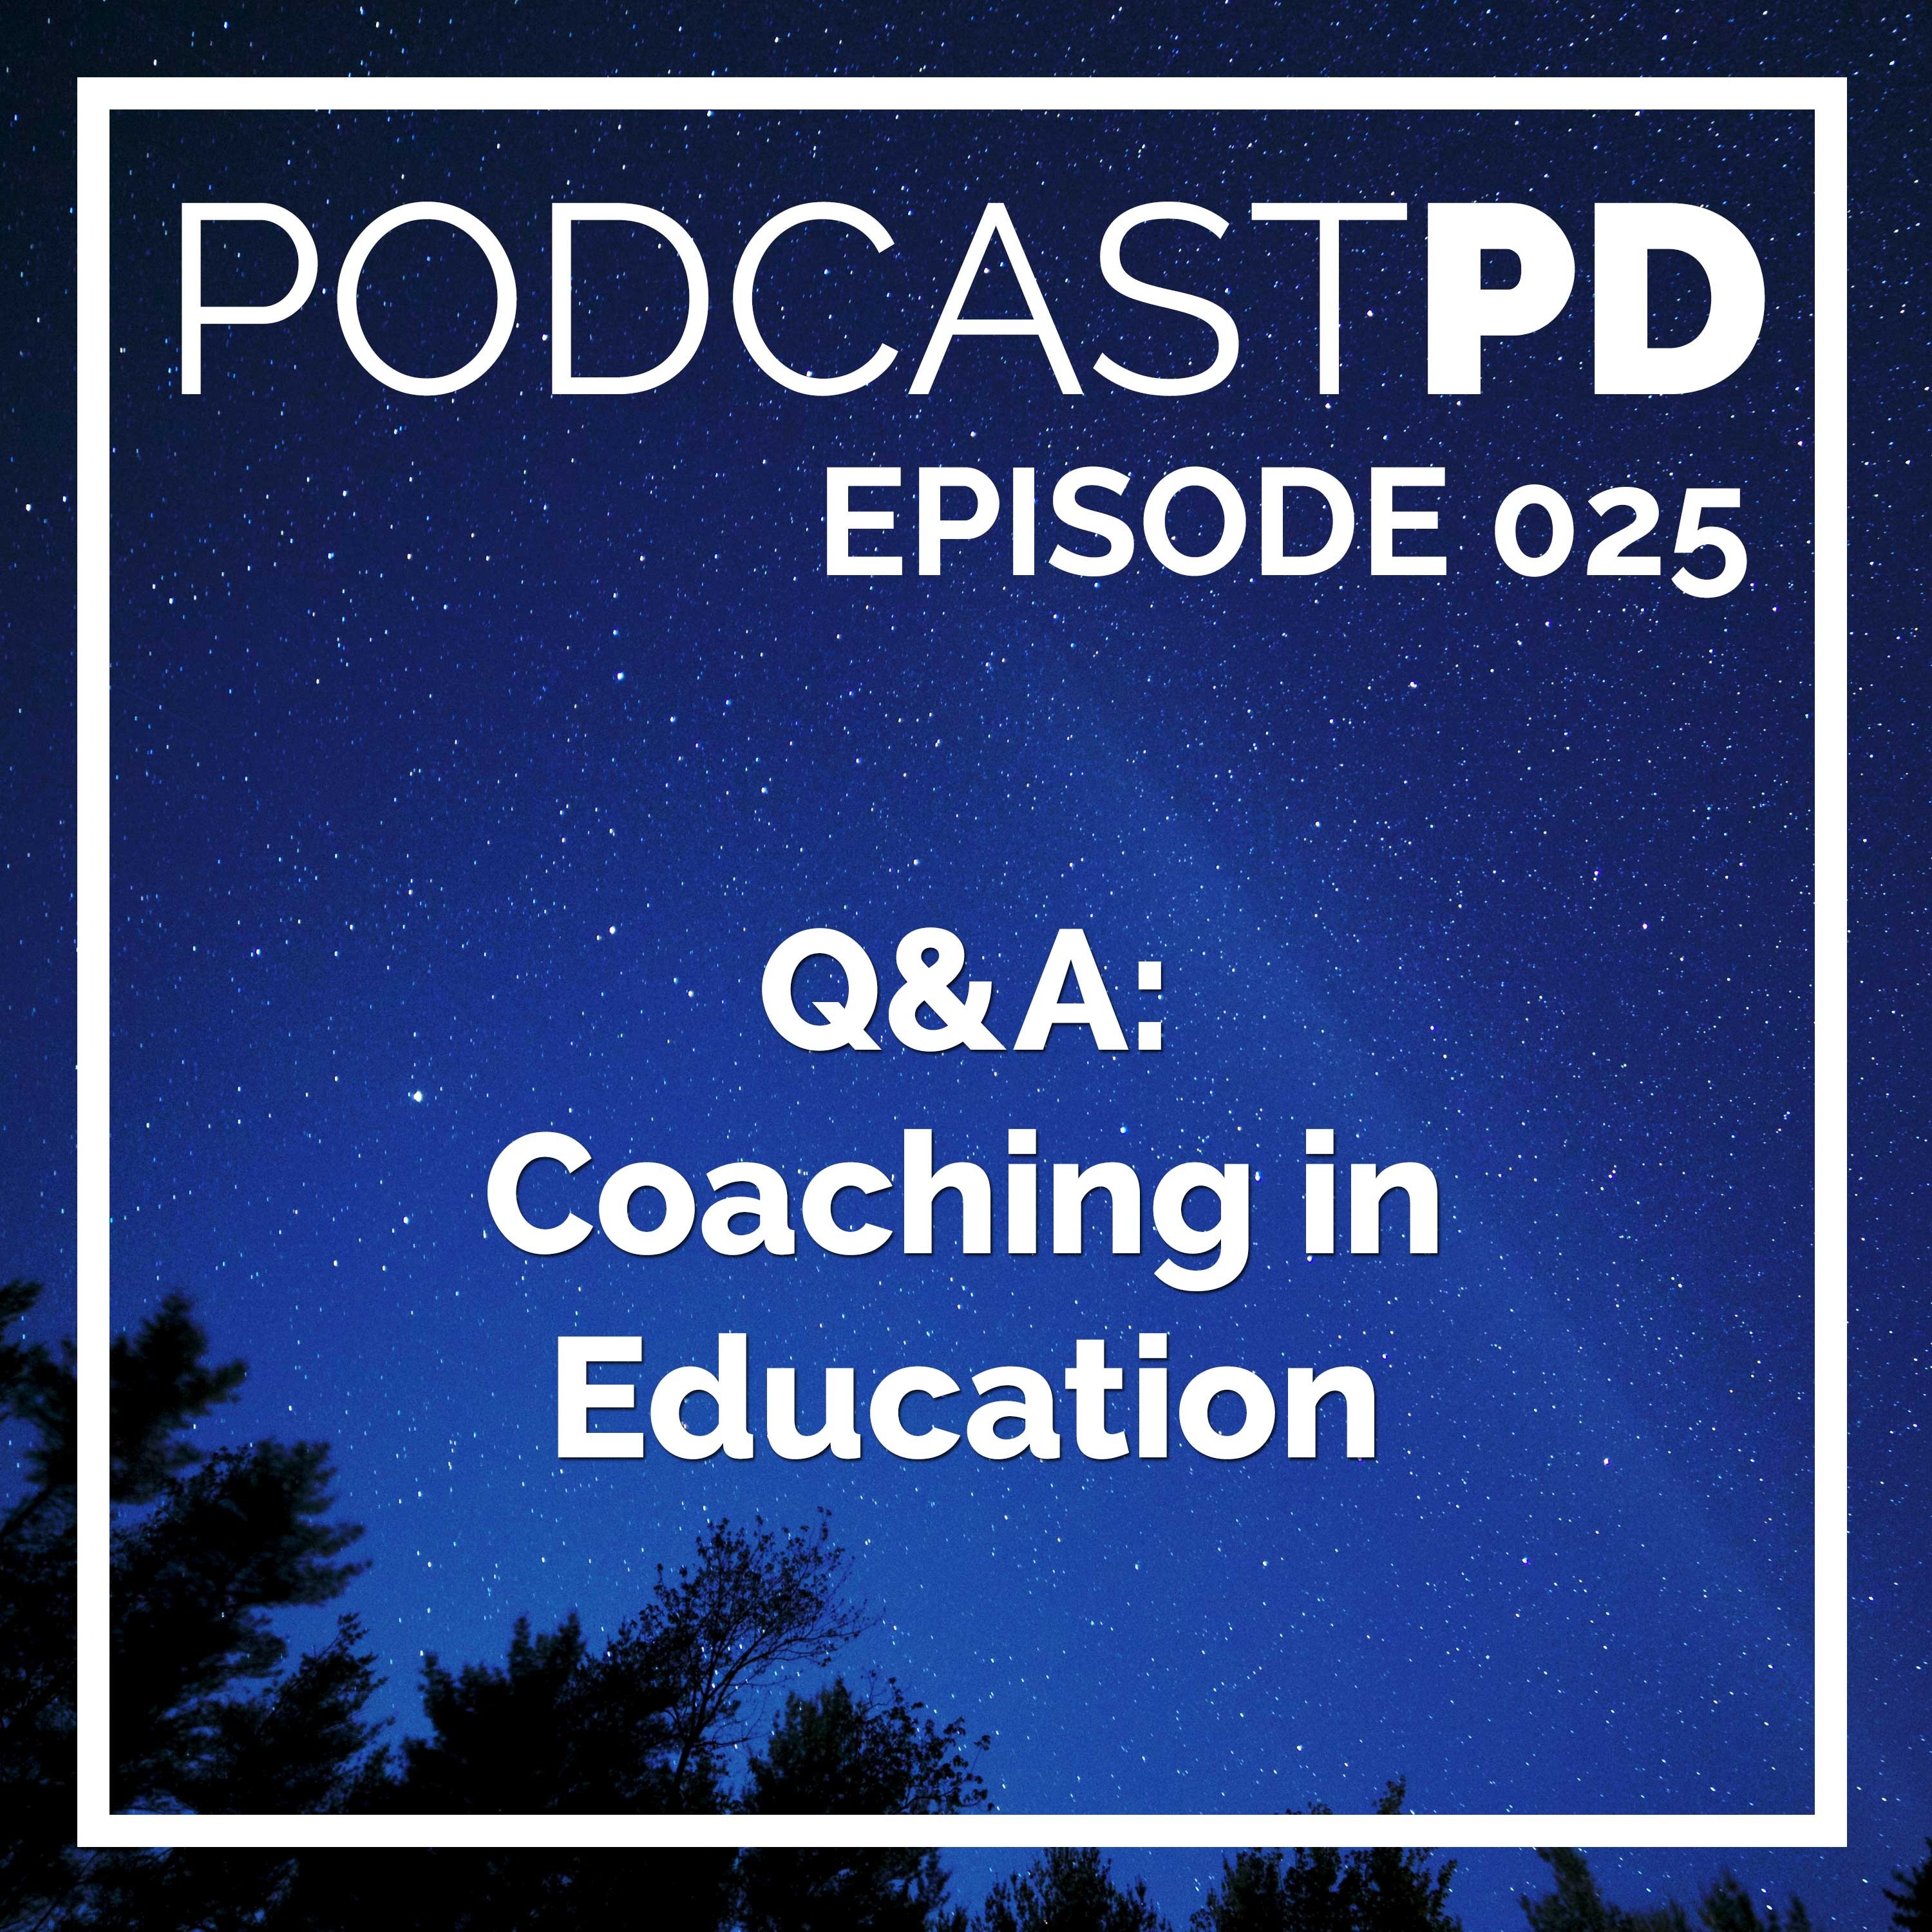 Q&A: Coaching in Education Image